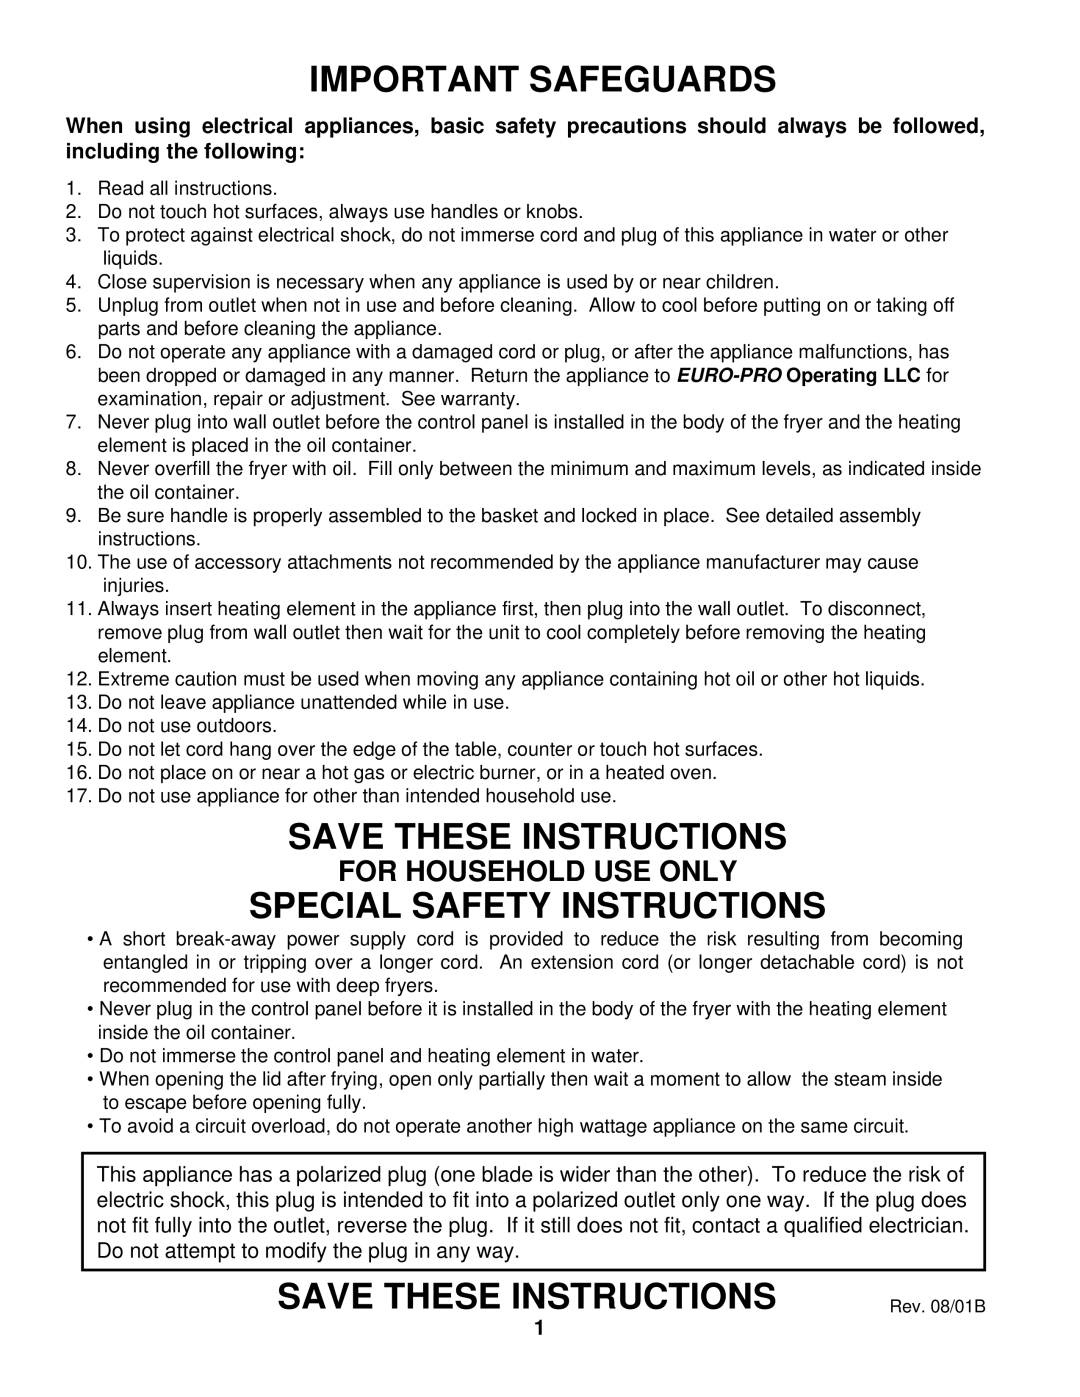 Bravetti EP165 manual For Household Use Only, Important Safeguards, Save These Instructions, Special Safety Instructions 